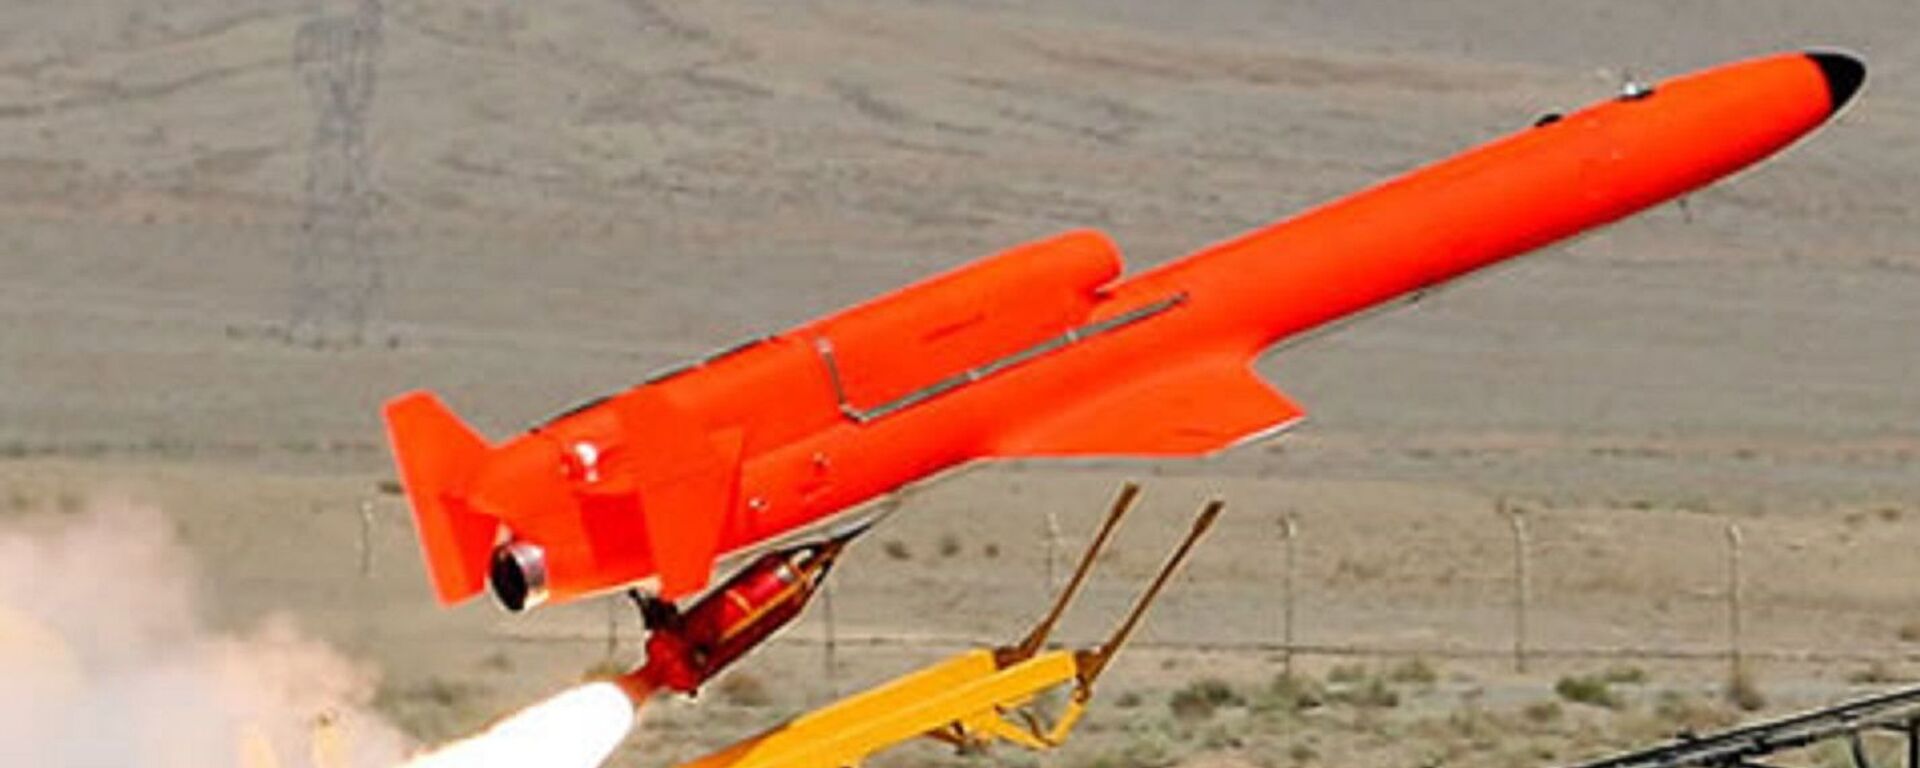 The Iranian jet powered drone Karrar launched by Rocket Assist Take-Off (RATO) booster, acceleratingh the vehicle from a stationary ground launcher. Karrar can also be launched from an aerial platform. - Sputnik International, 1920, 18.04.2021